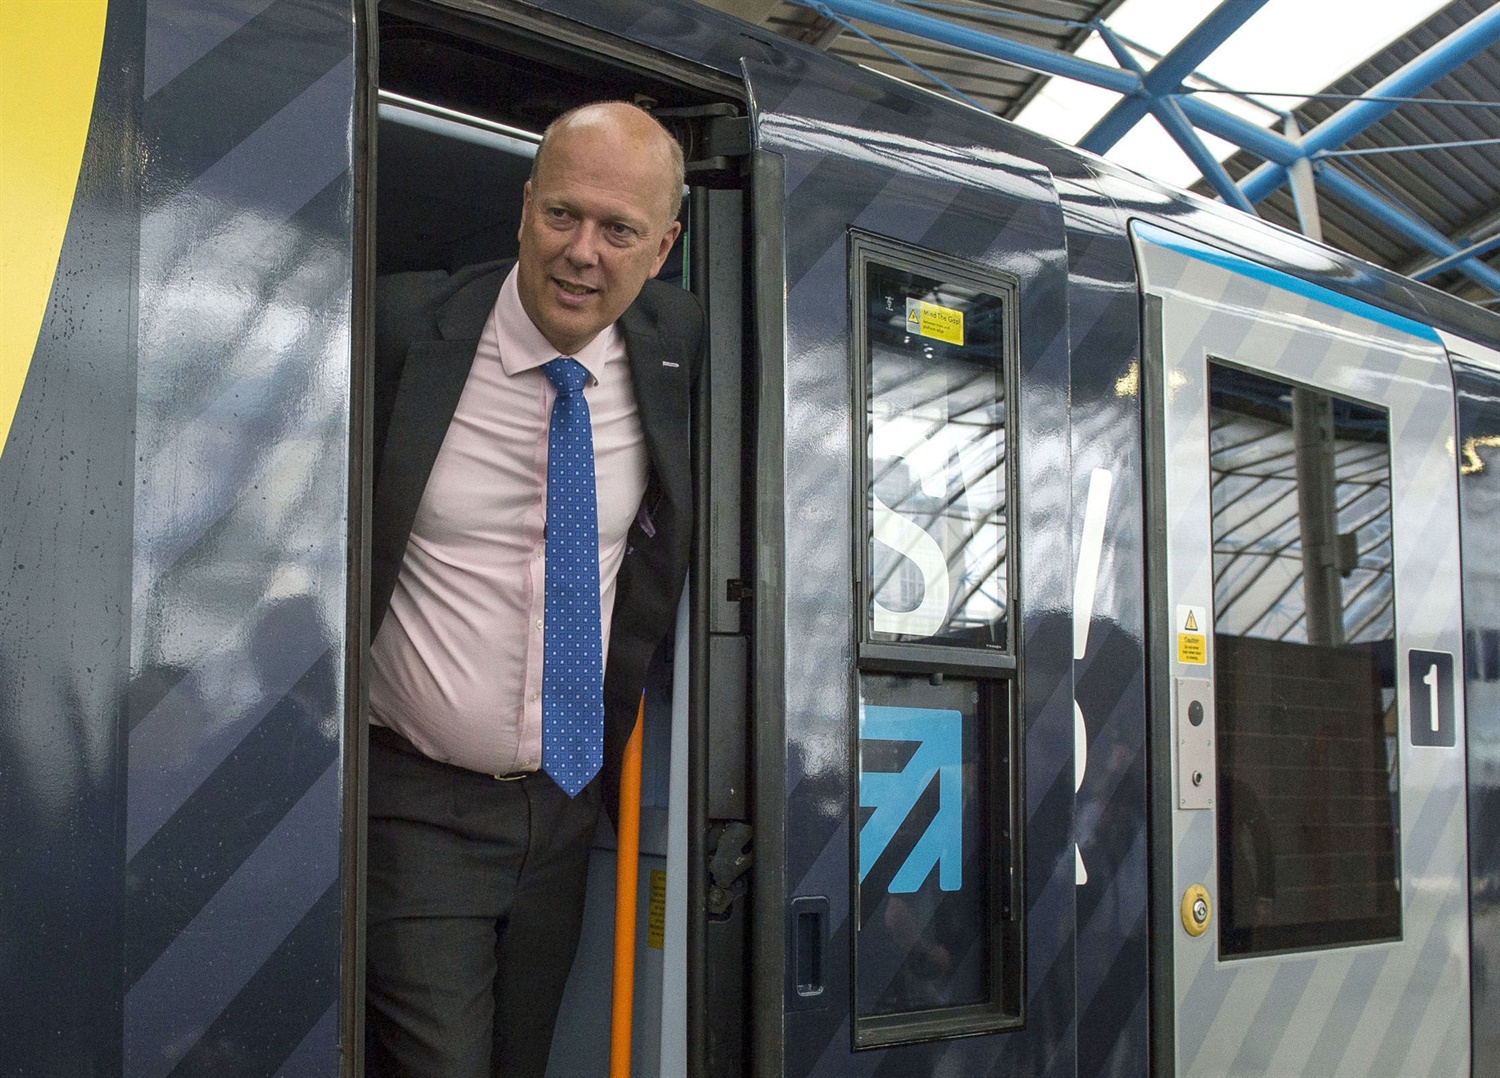 Manchester council scolds Grayling for living in ‘complete fantasy’ on rail expansion delays